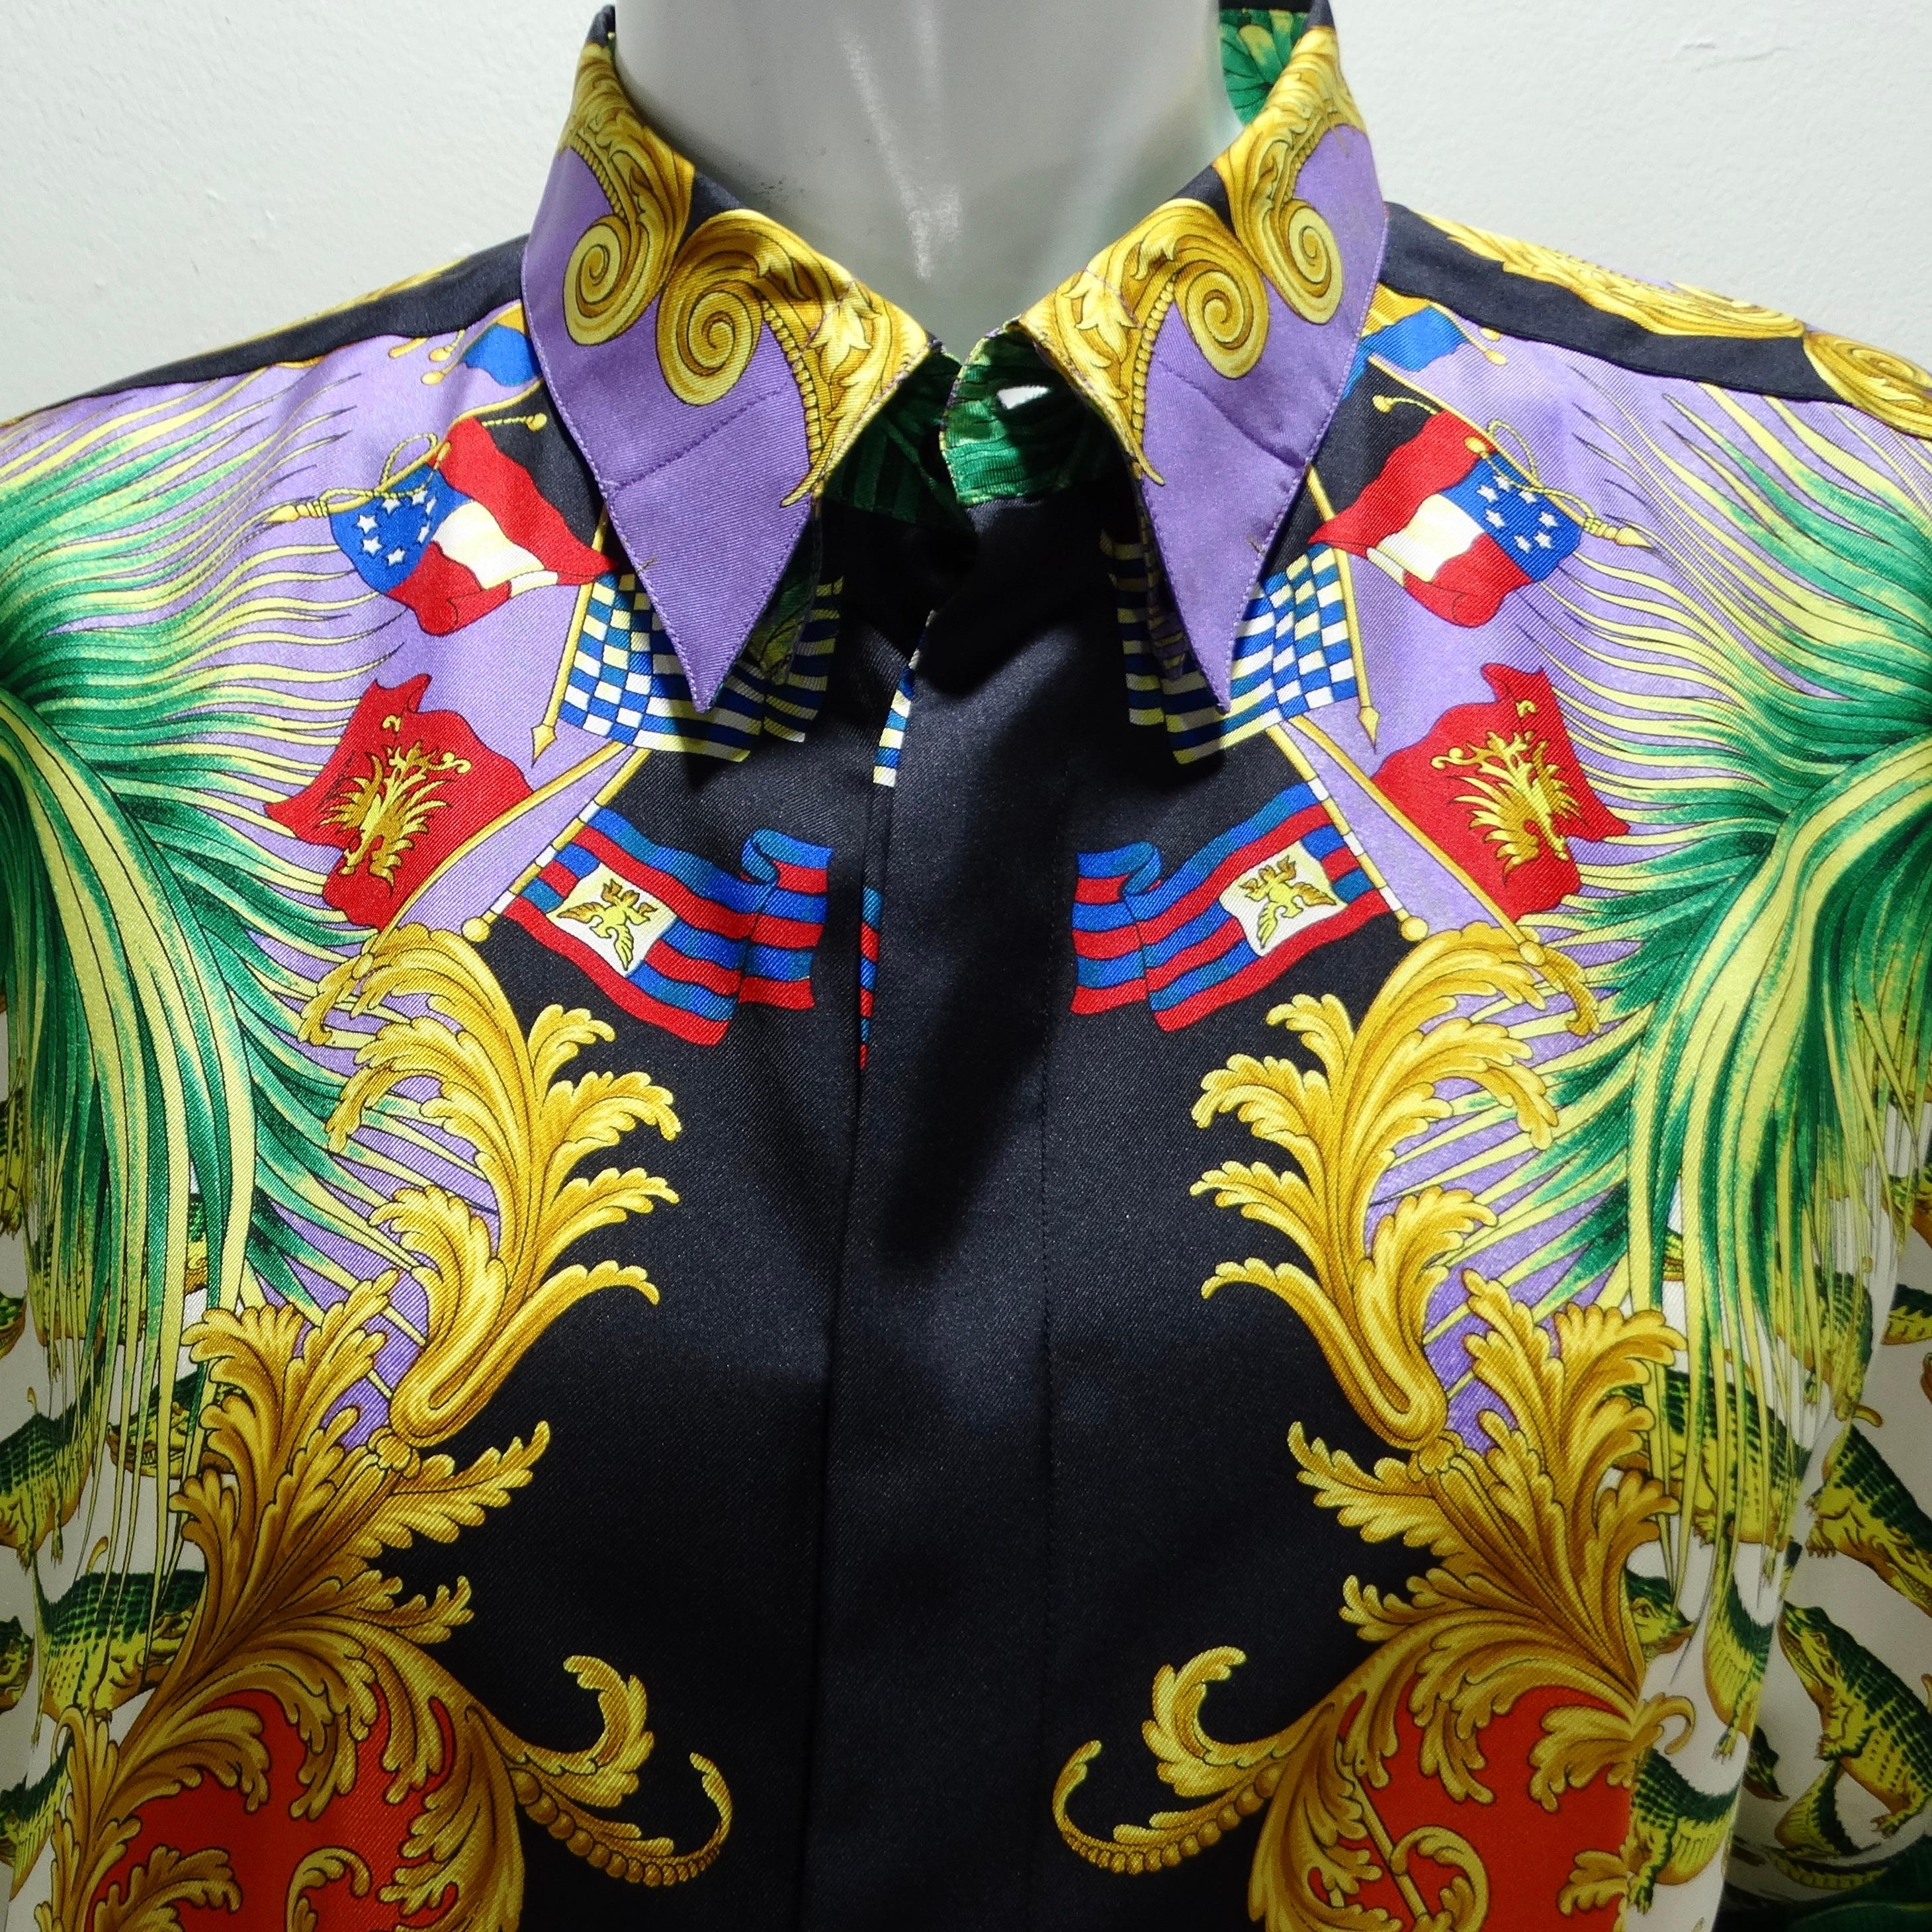 Introducing the iconic Gianni Versace Spring/Summer 1993 Miami Collection Silk Shirt, a rare and extraordinary piece that encapsulates the vibrancy and glamour of the era. Crafted from luxurious silk, this printed button-up shirt is a testament to